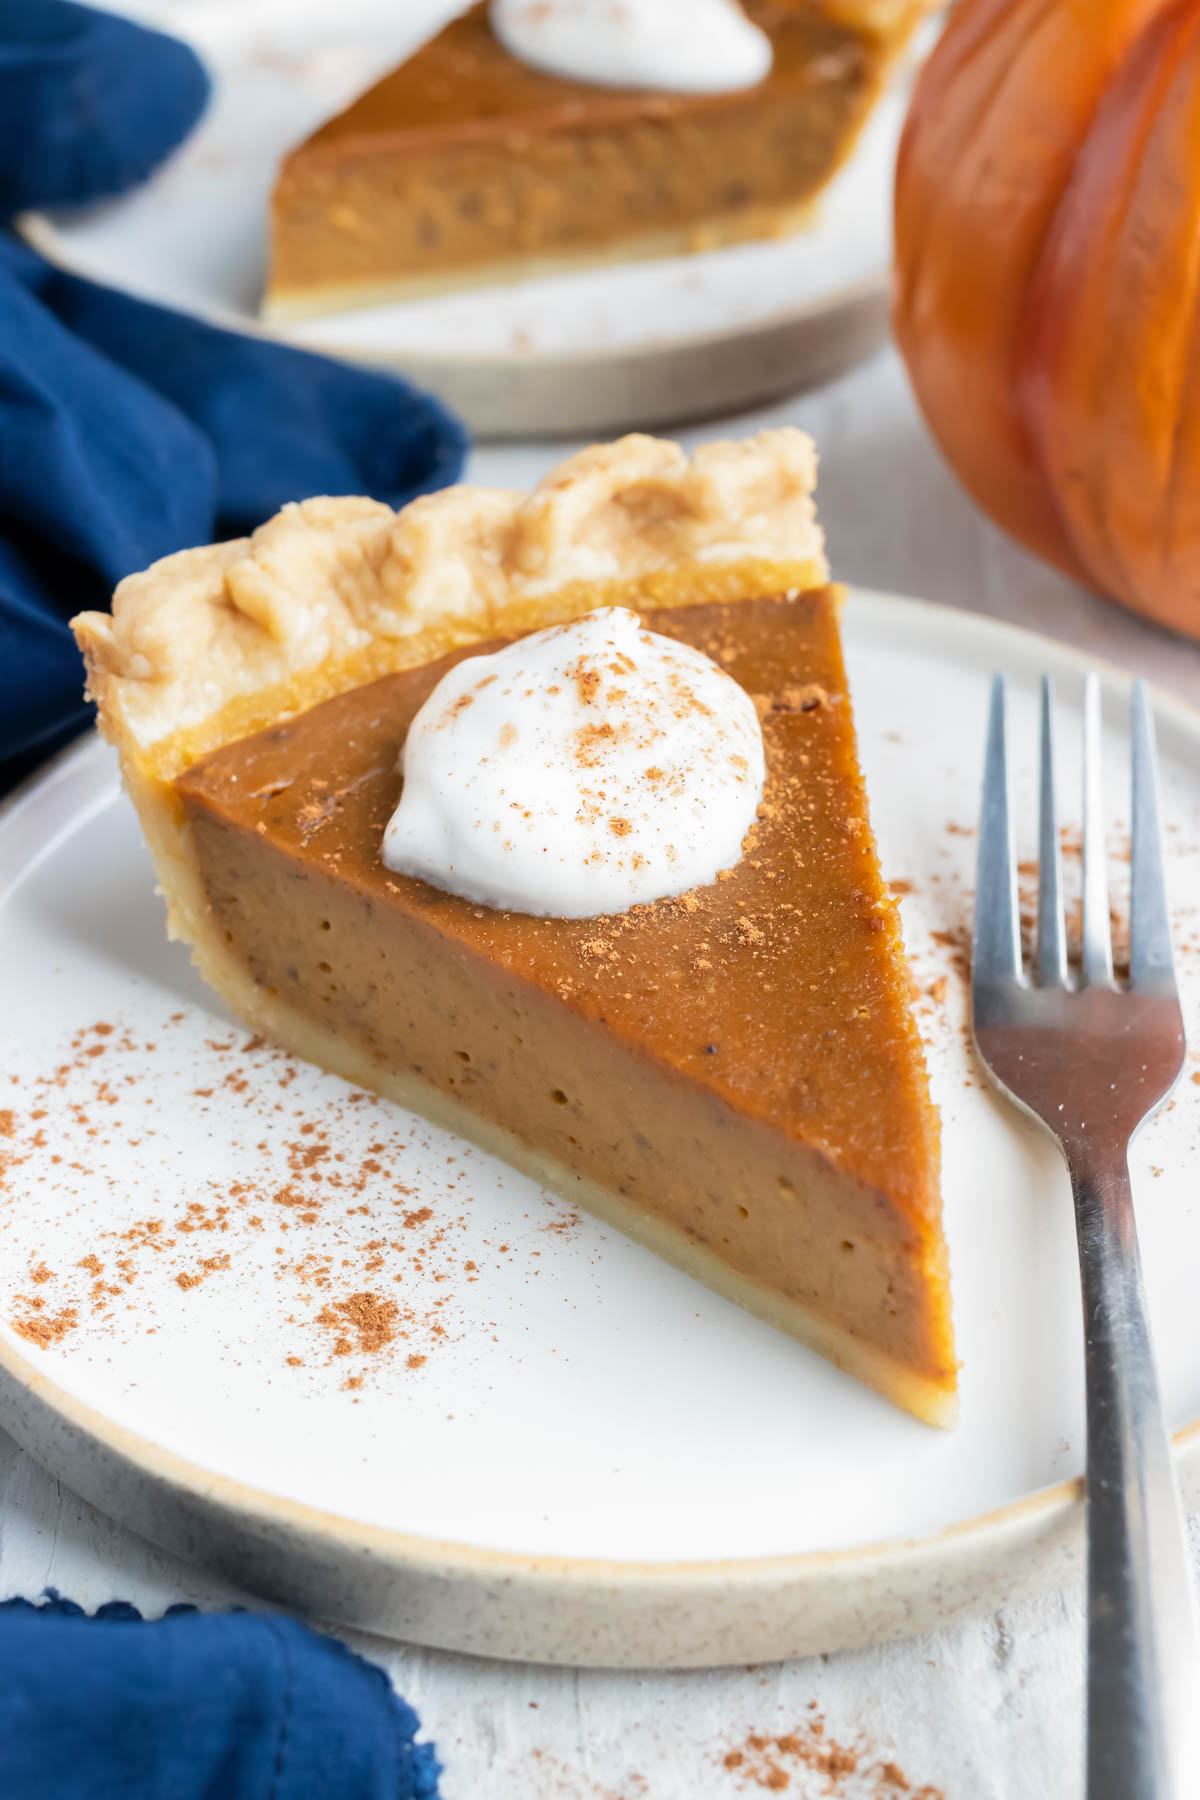 A slice of homemade pumpkin pie with whipped cream on a plate.